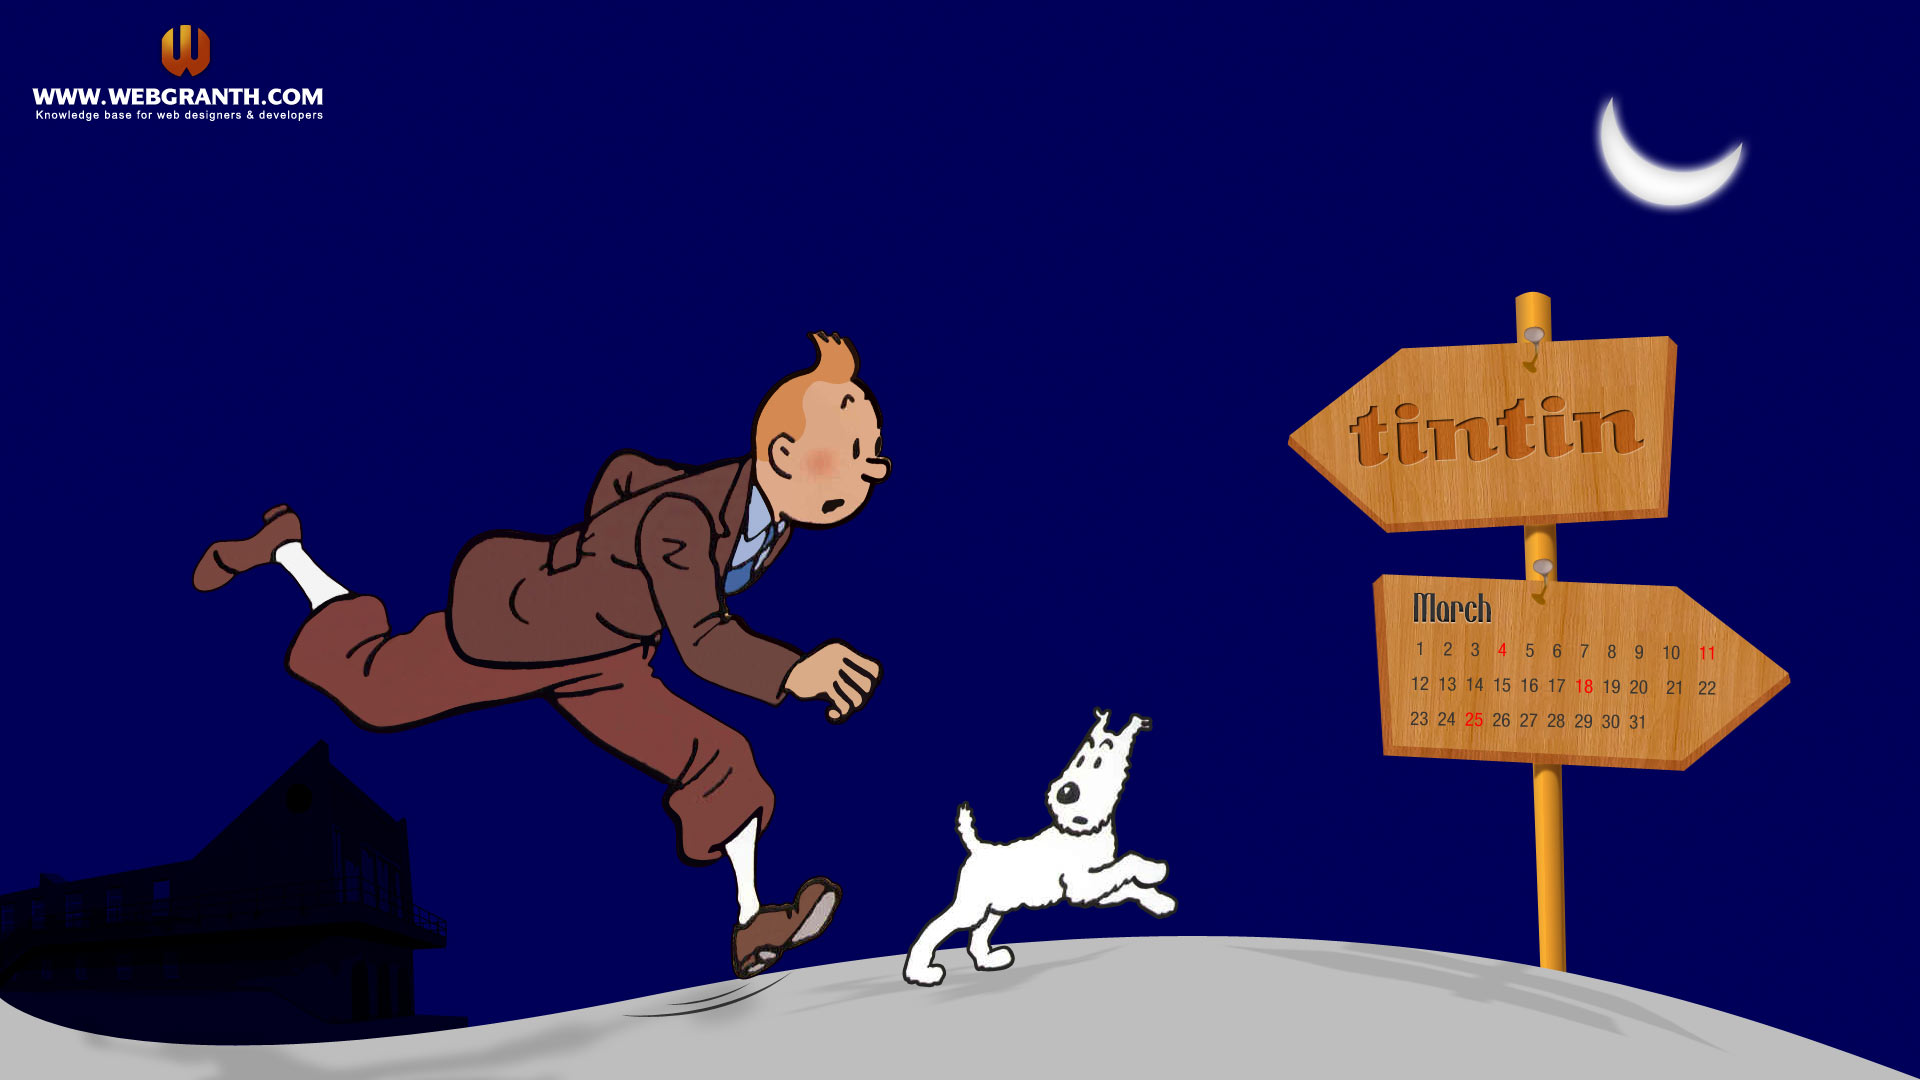 Tintin cartoon march wallpaper calender 2012 View HD Image of